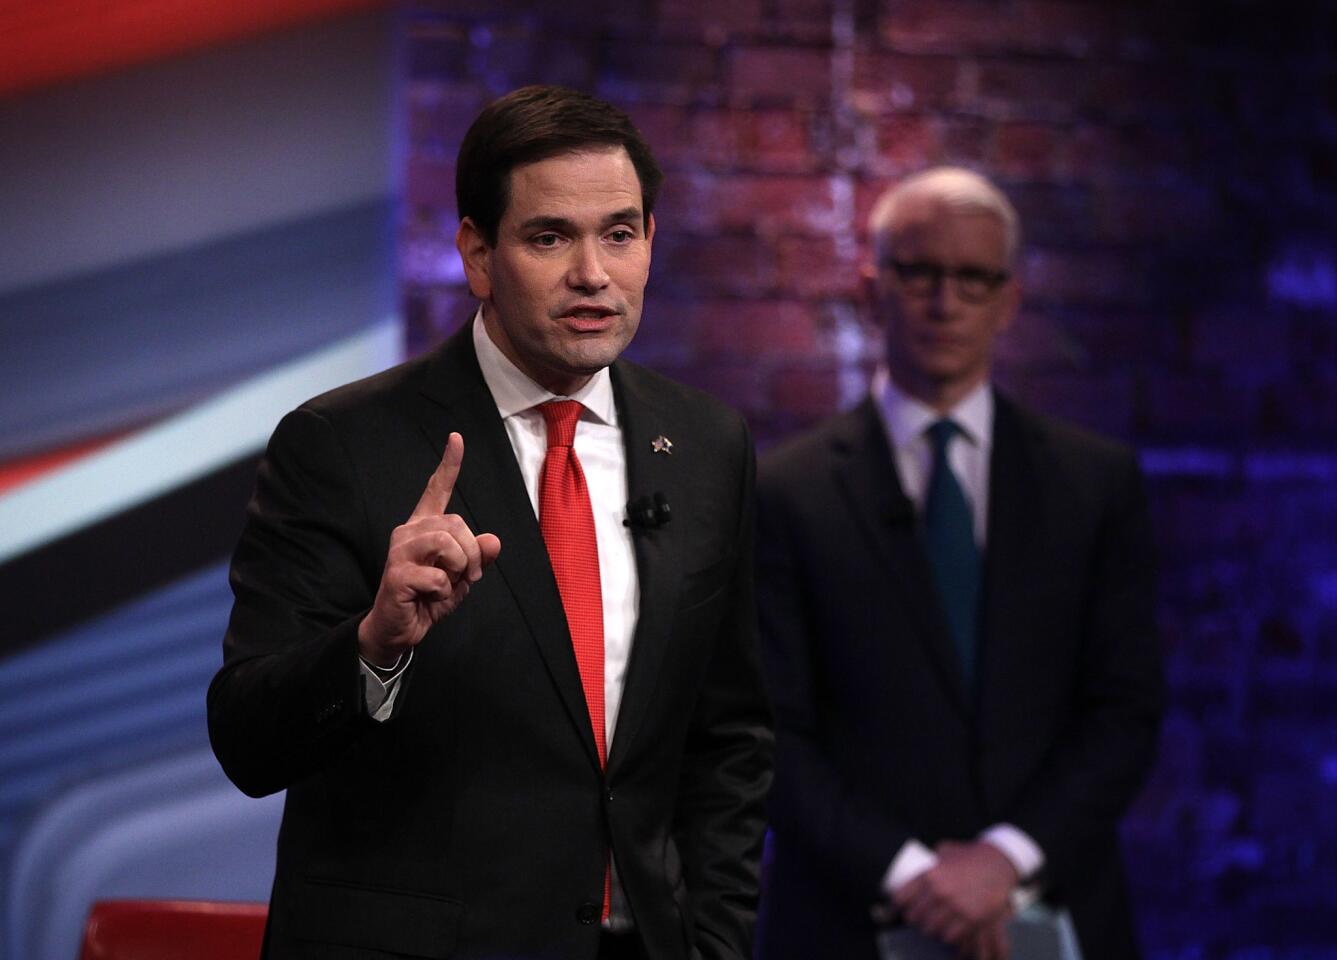 Republican presidential candidate Marco Rubio participates in the town hall with Anderson Cooper.